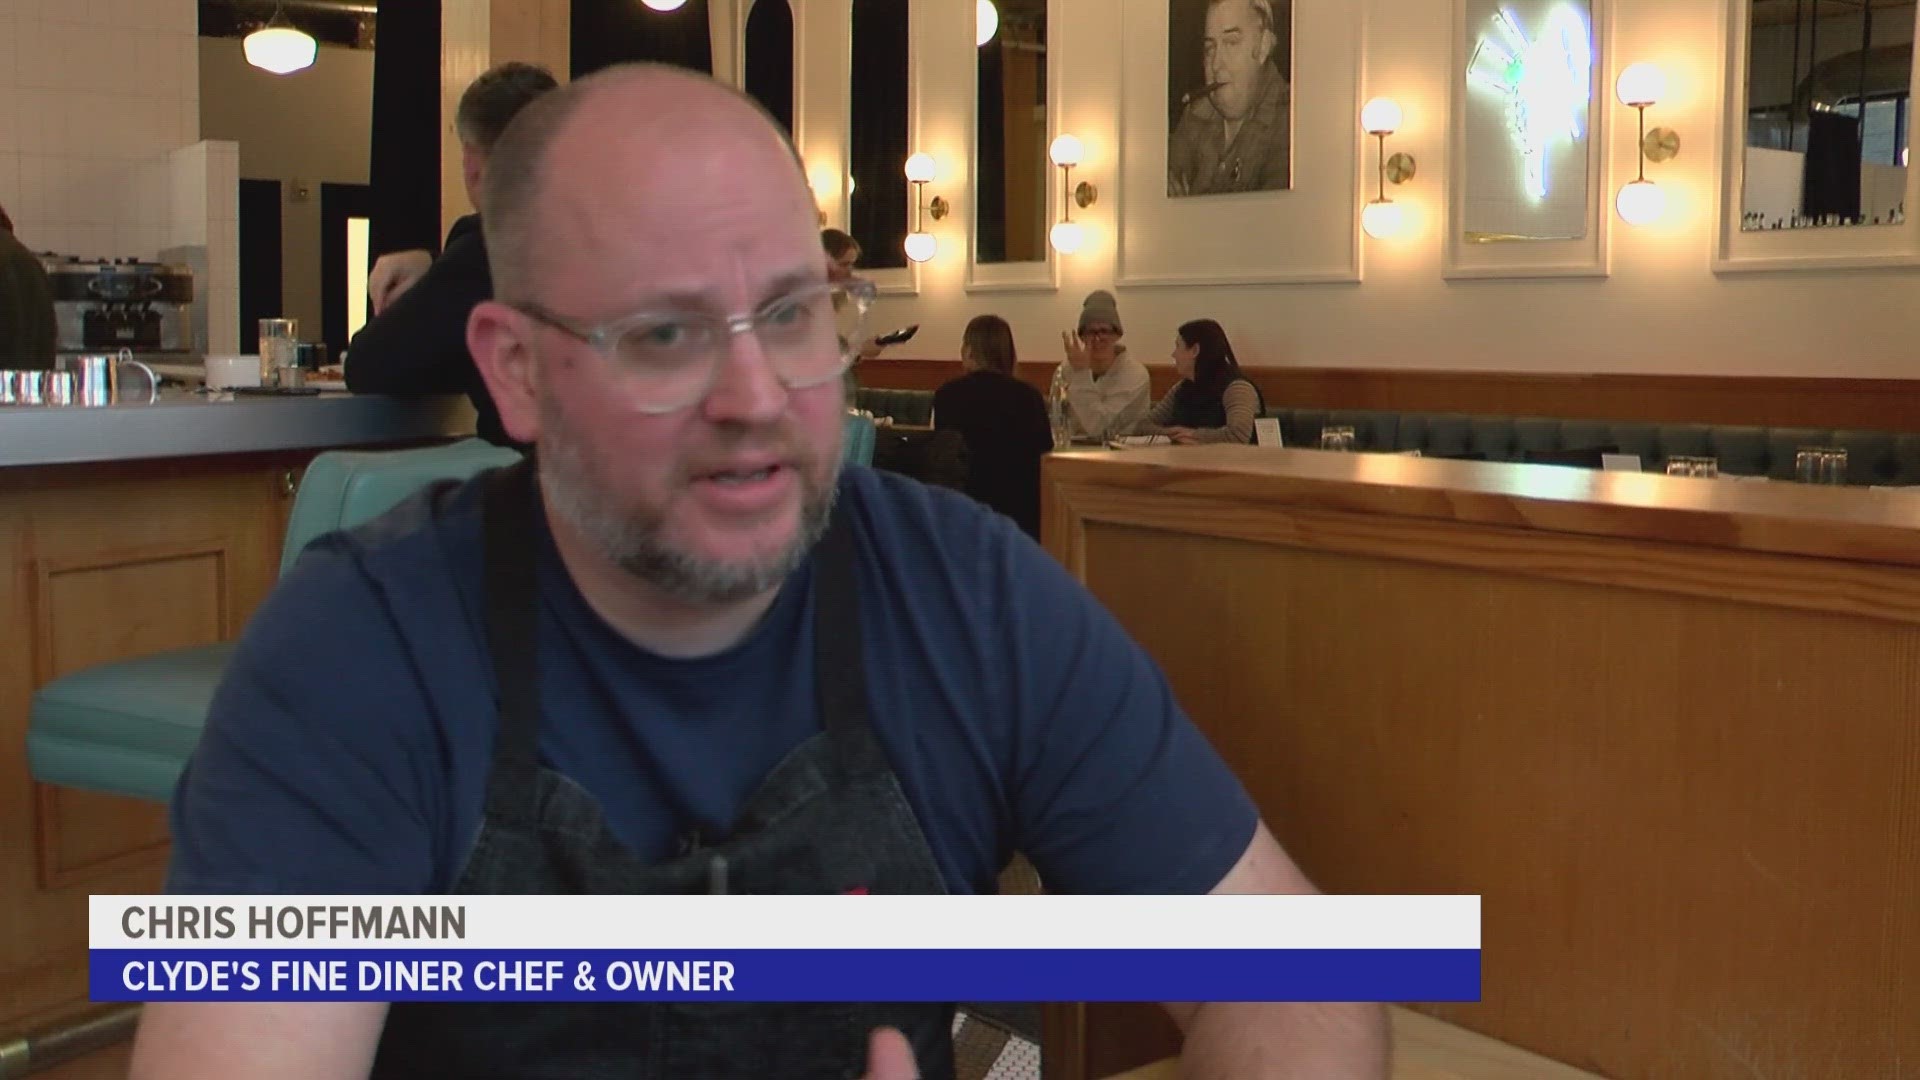 "I'm overwhelmed with emotion and incredibly honored," the chef wrote on Facebook.